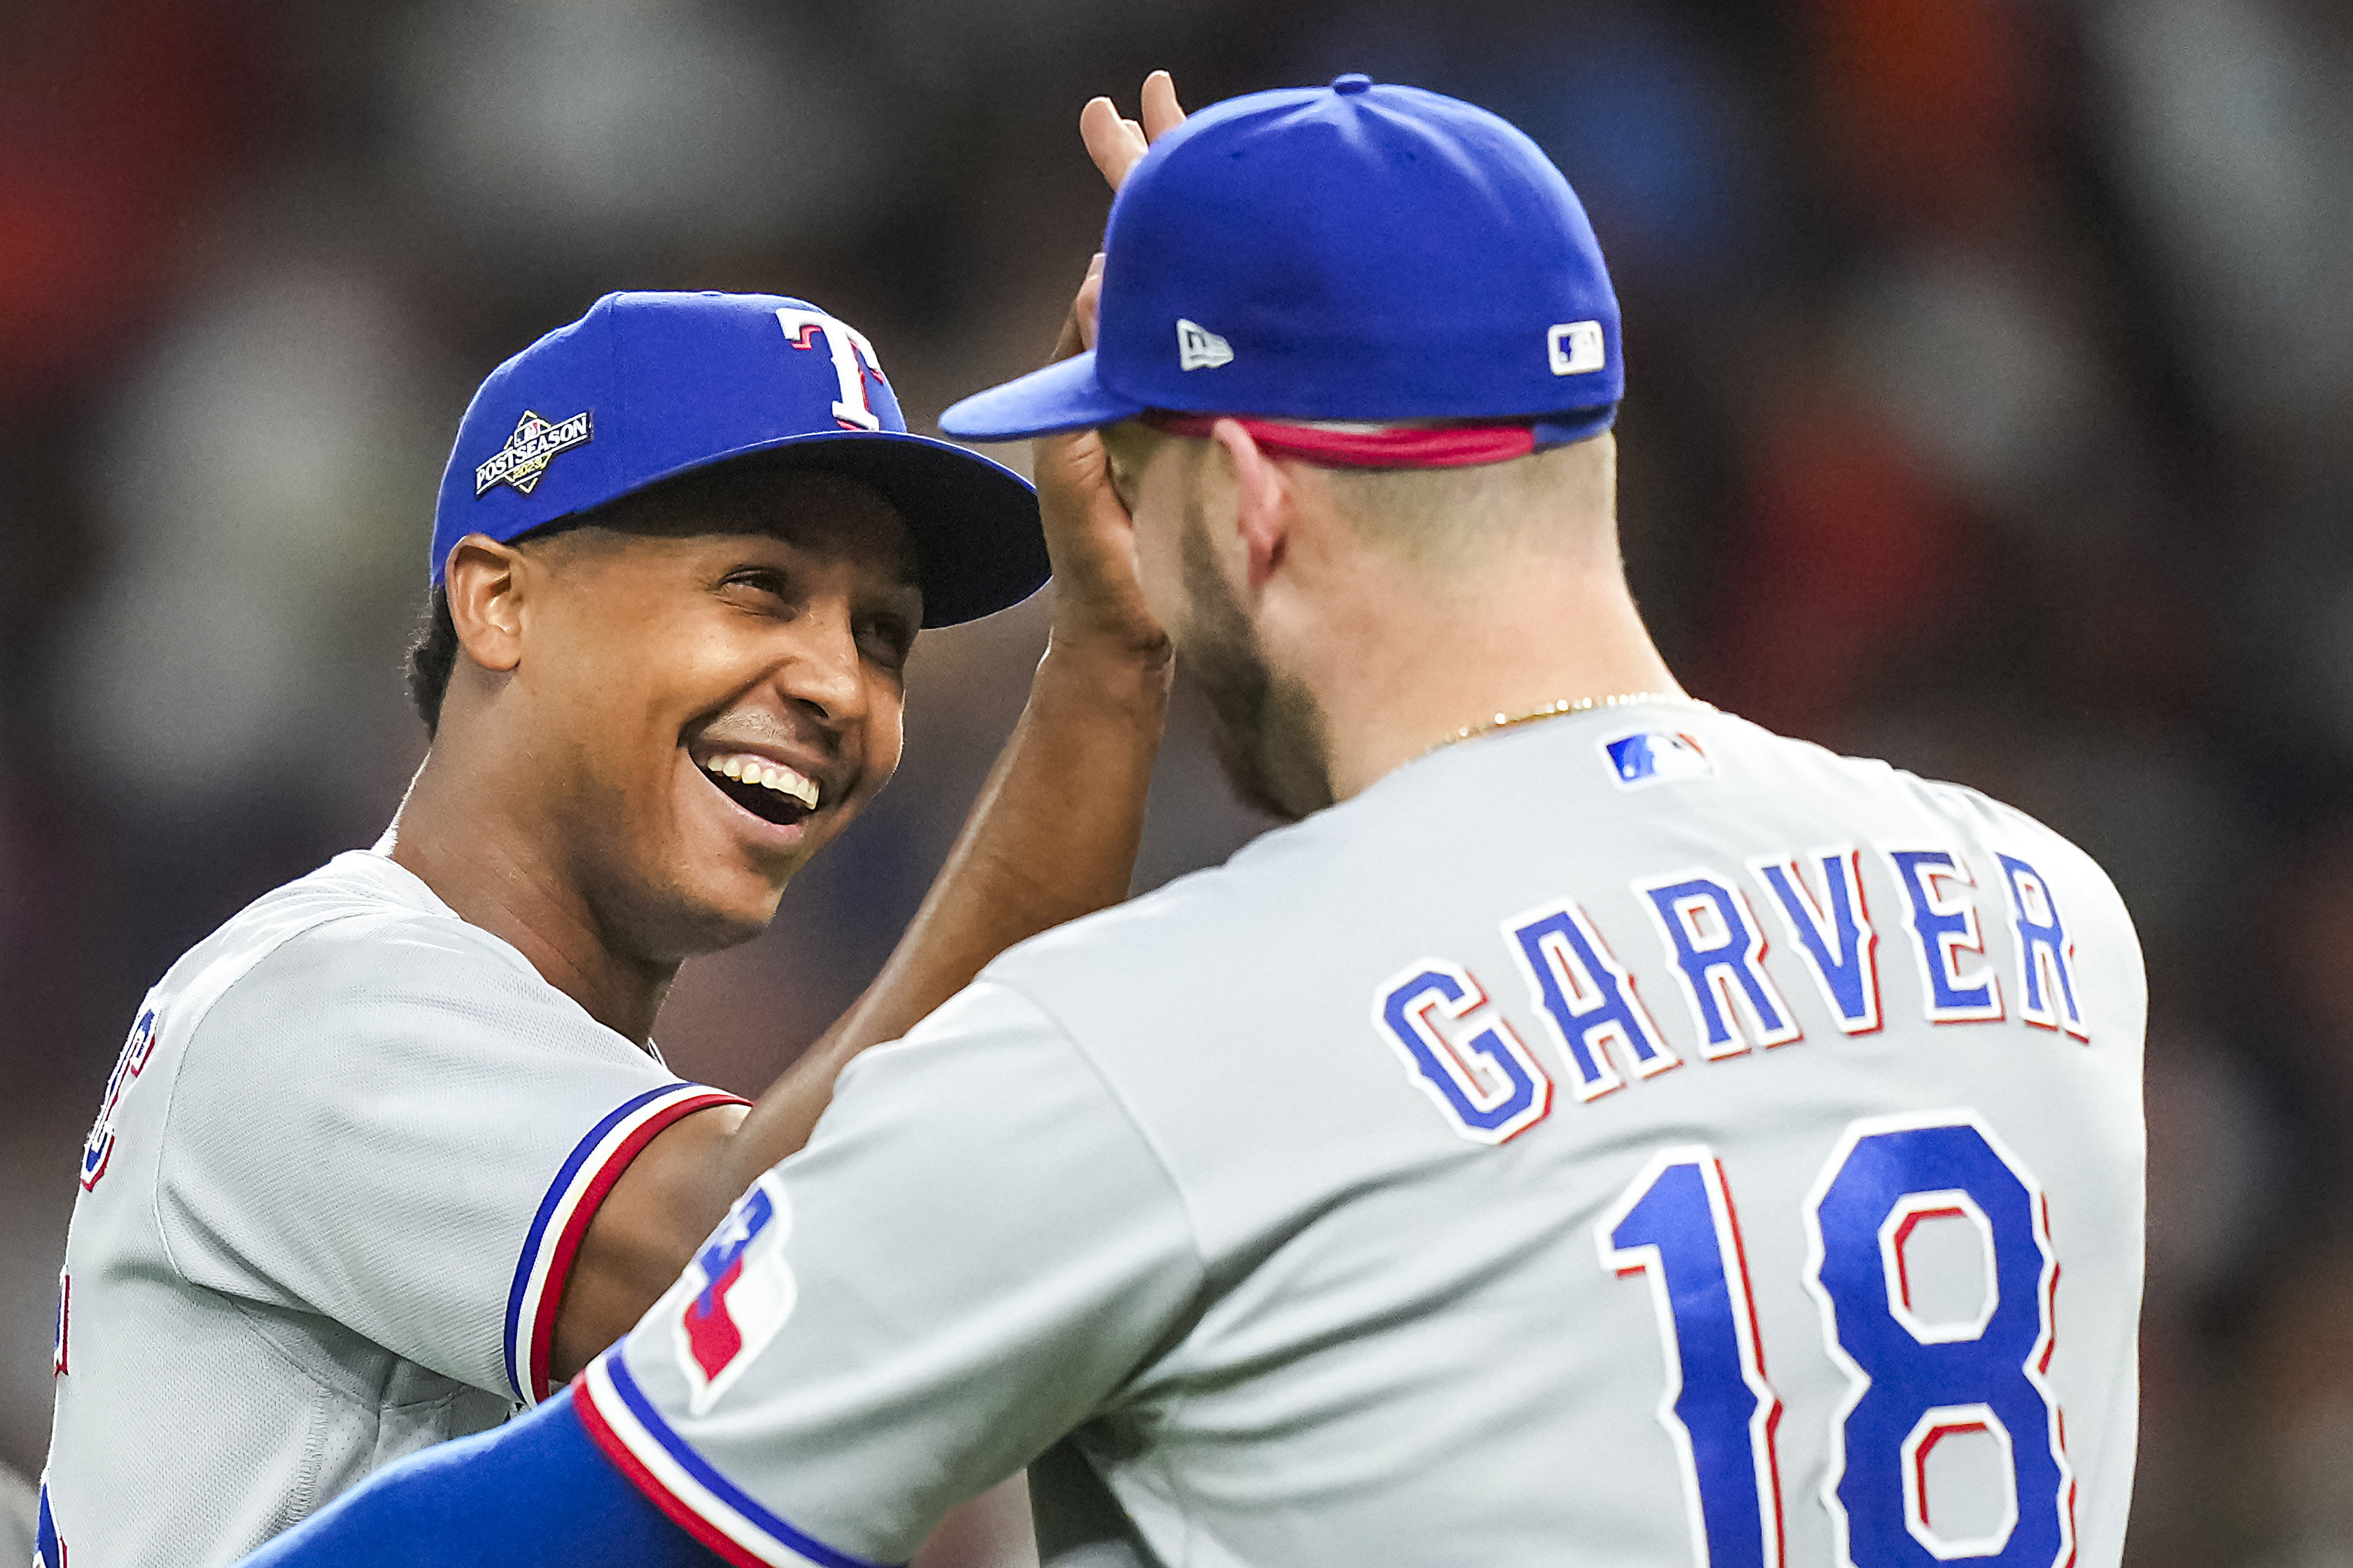 Houston completes rally to win another AL West title, as Rangers